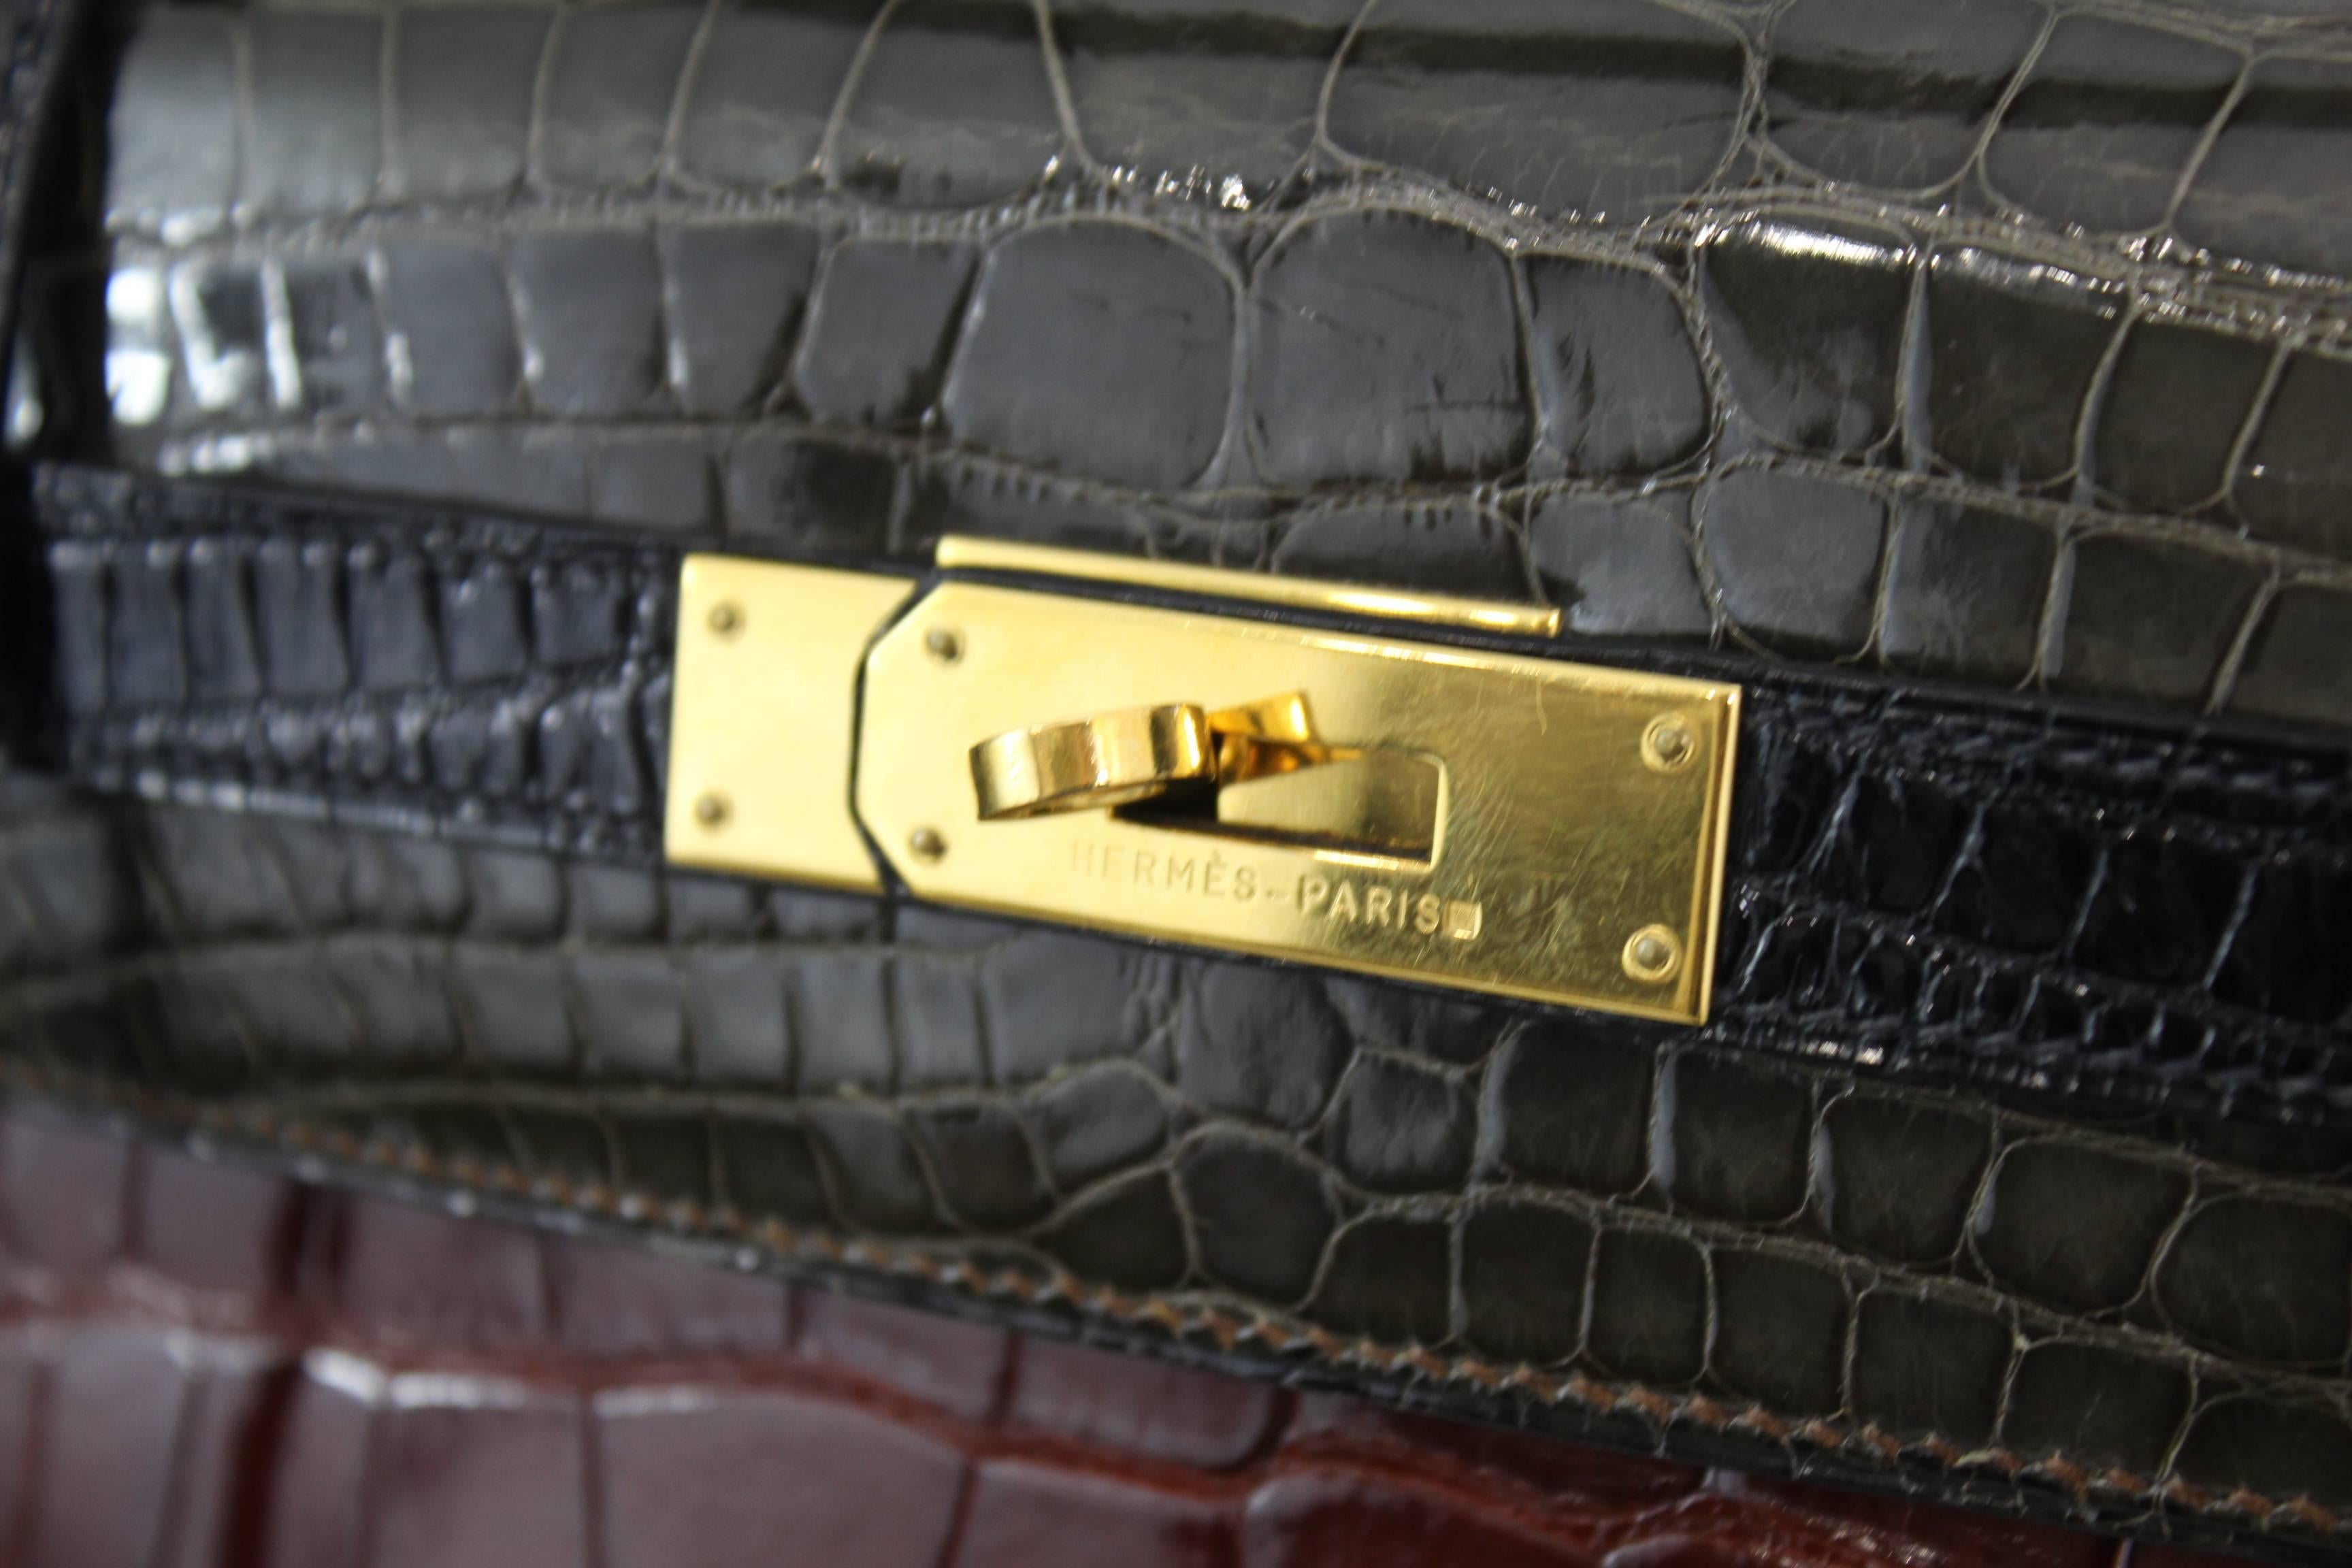 For sale an amazing piece from Hermes a Kelly 32 in Alligator with black shoulder strap. A really hard to find piece perfect for collectors.

Used but  in excellent condition/ Hardly no signs of wear on it. 

Sold with dust bag.

No CITES

 